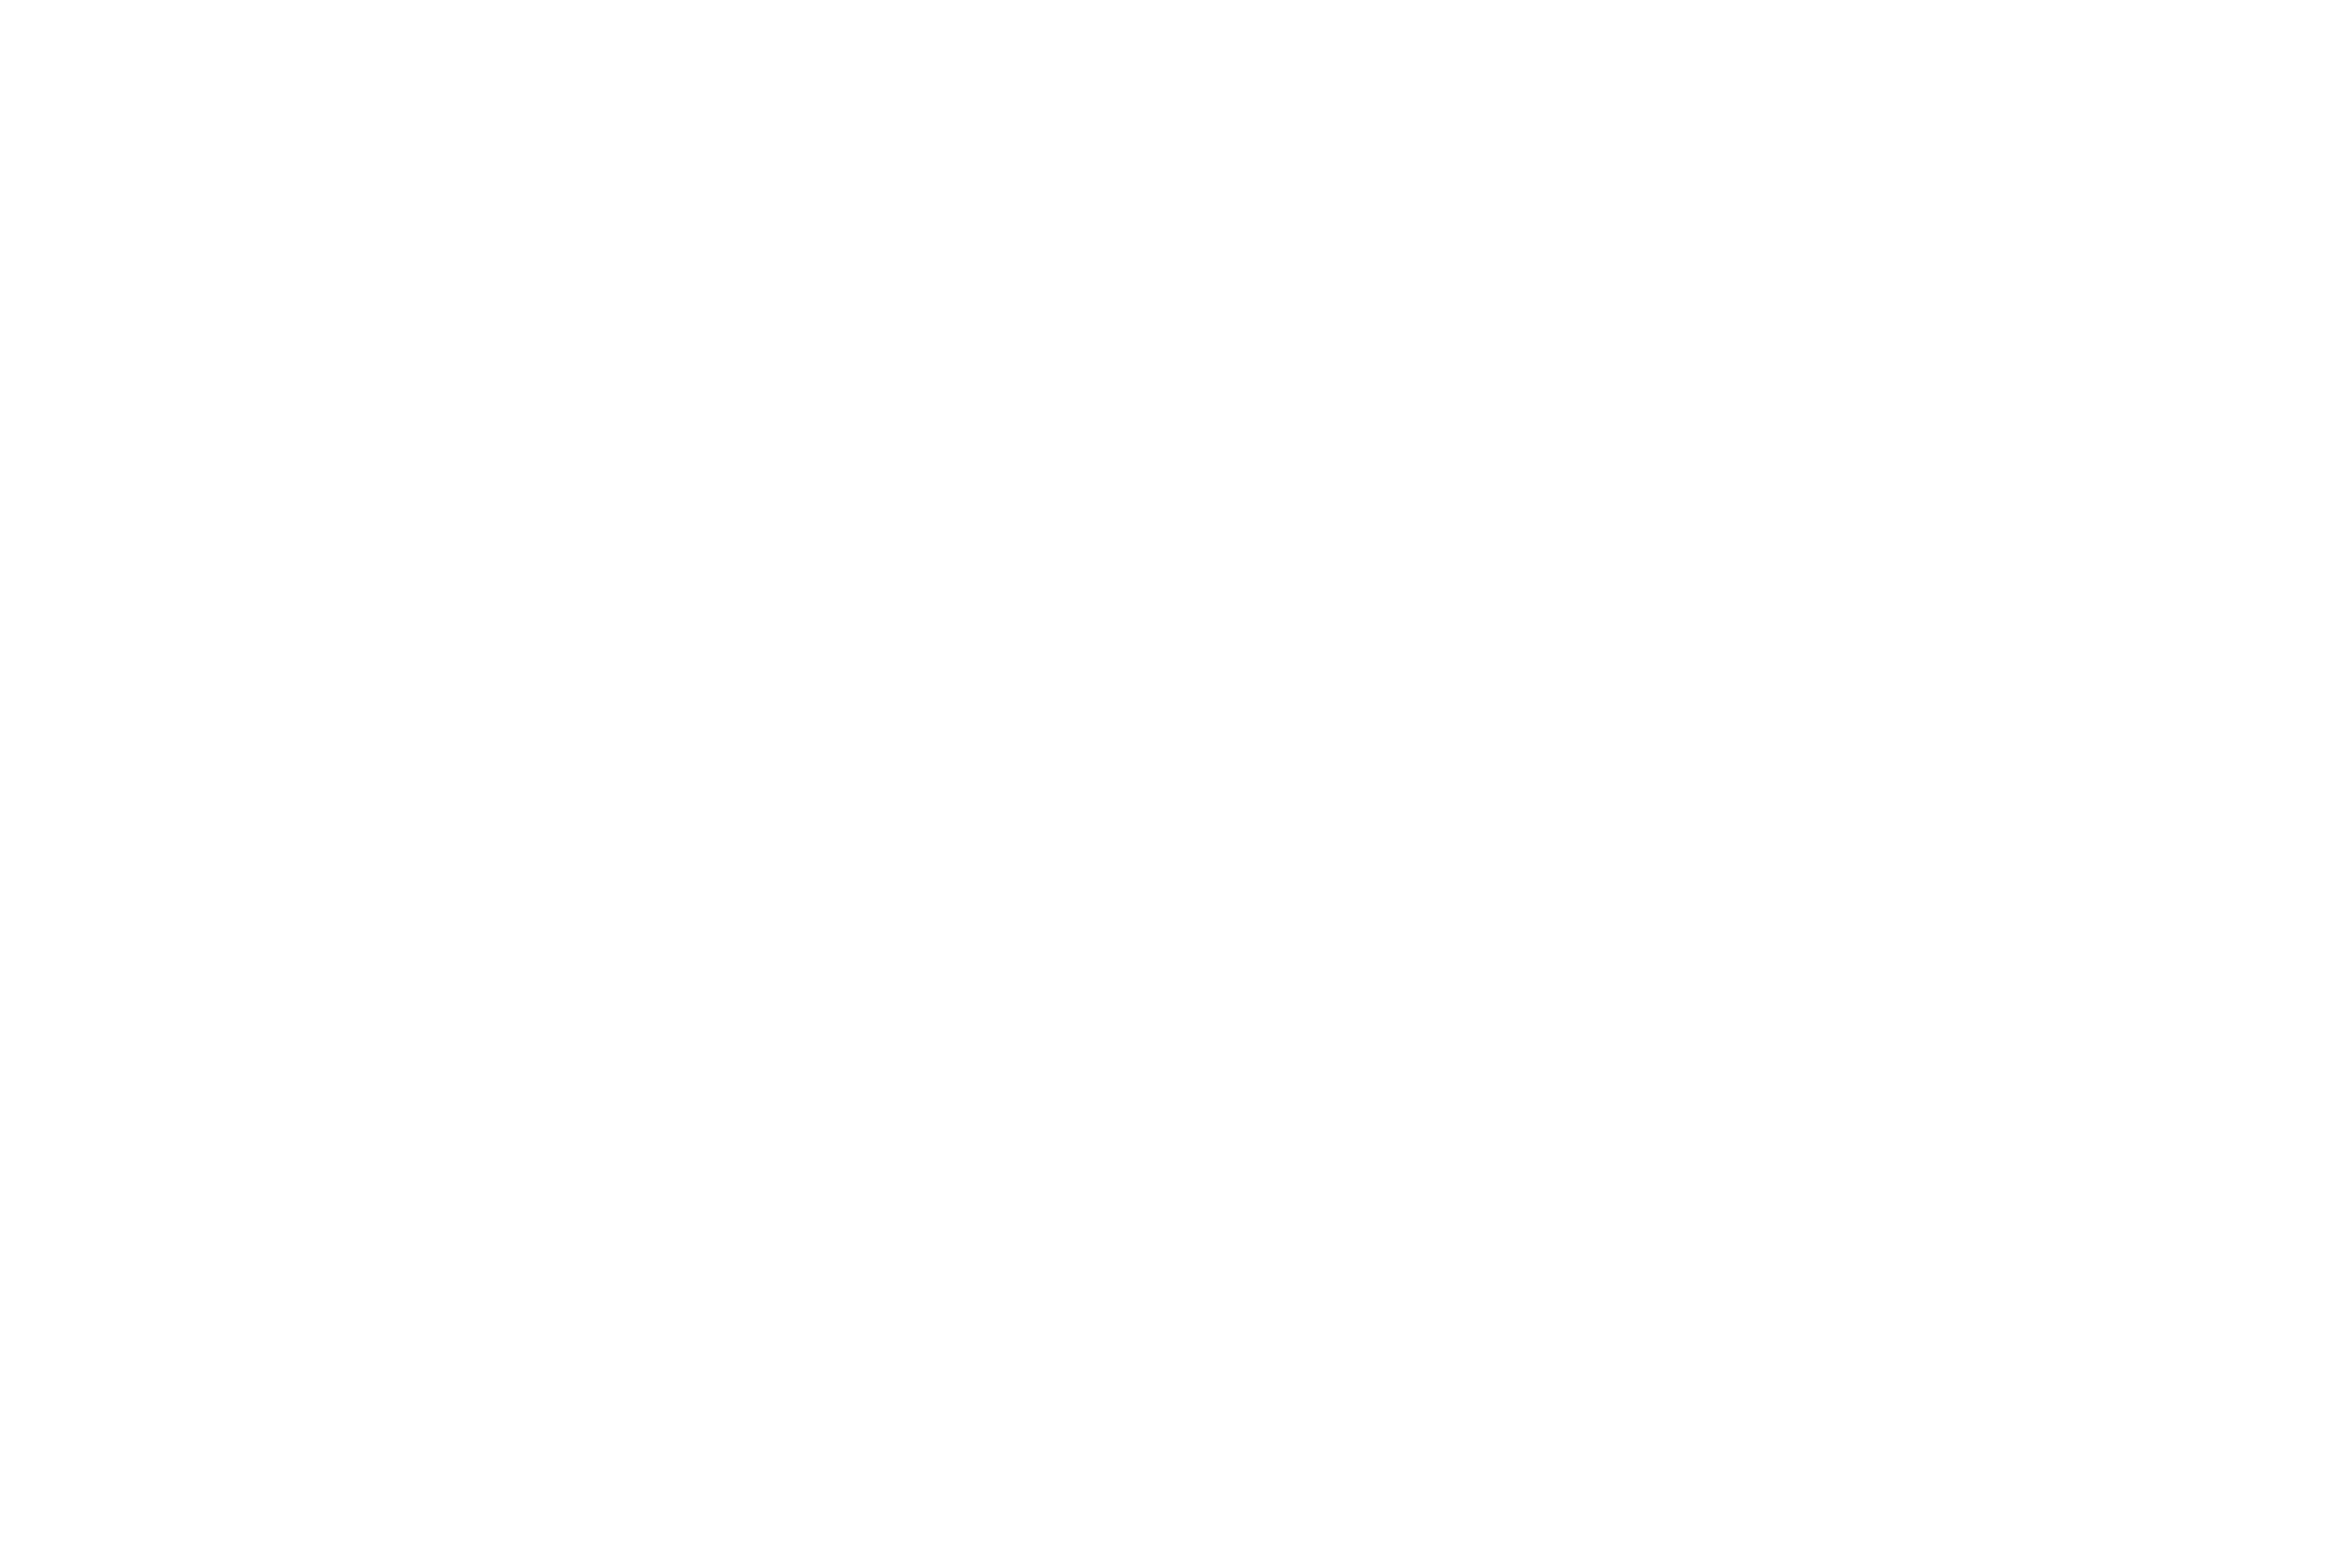 Green Theatres Network